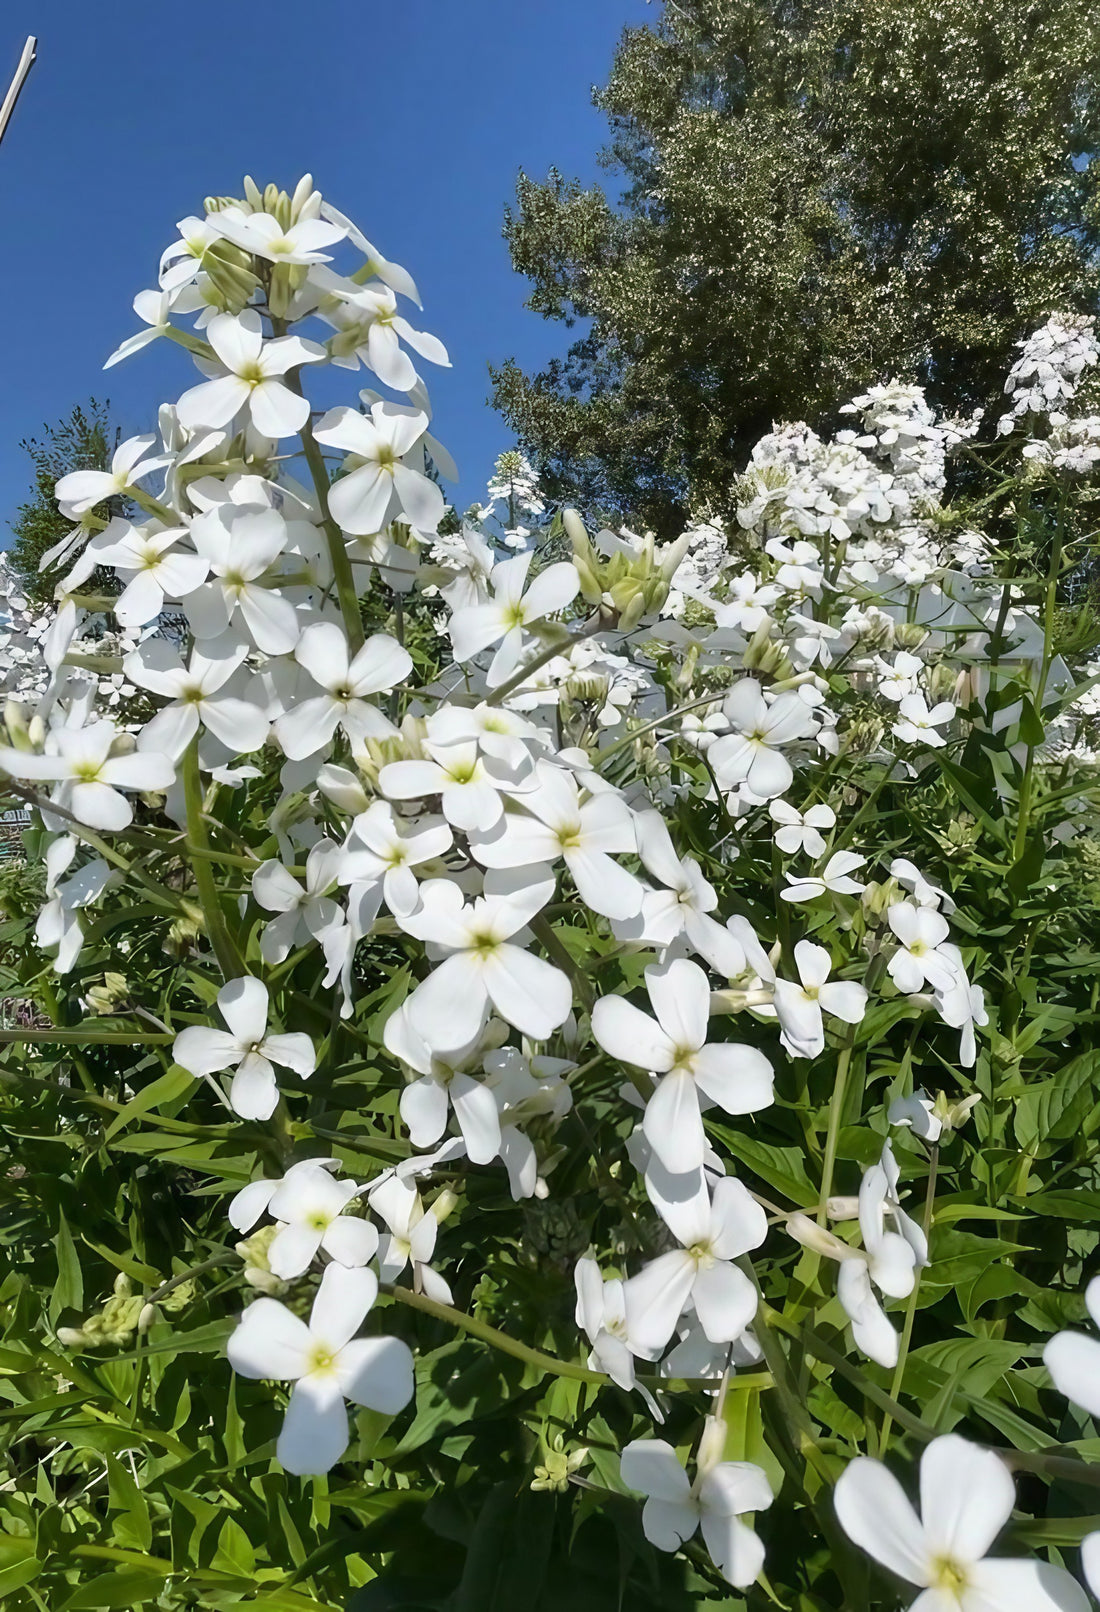 Garden view of Hesperis matronalis White flowers against a clear blue sky